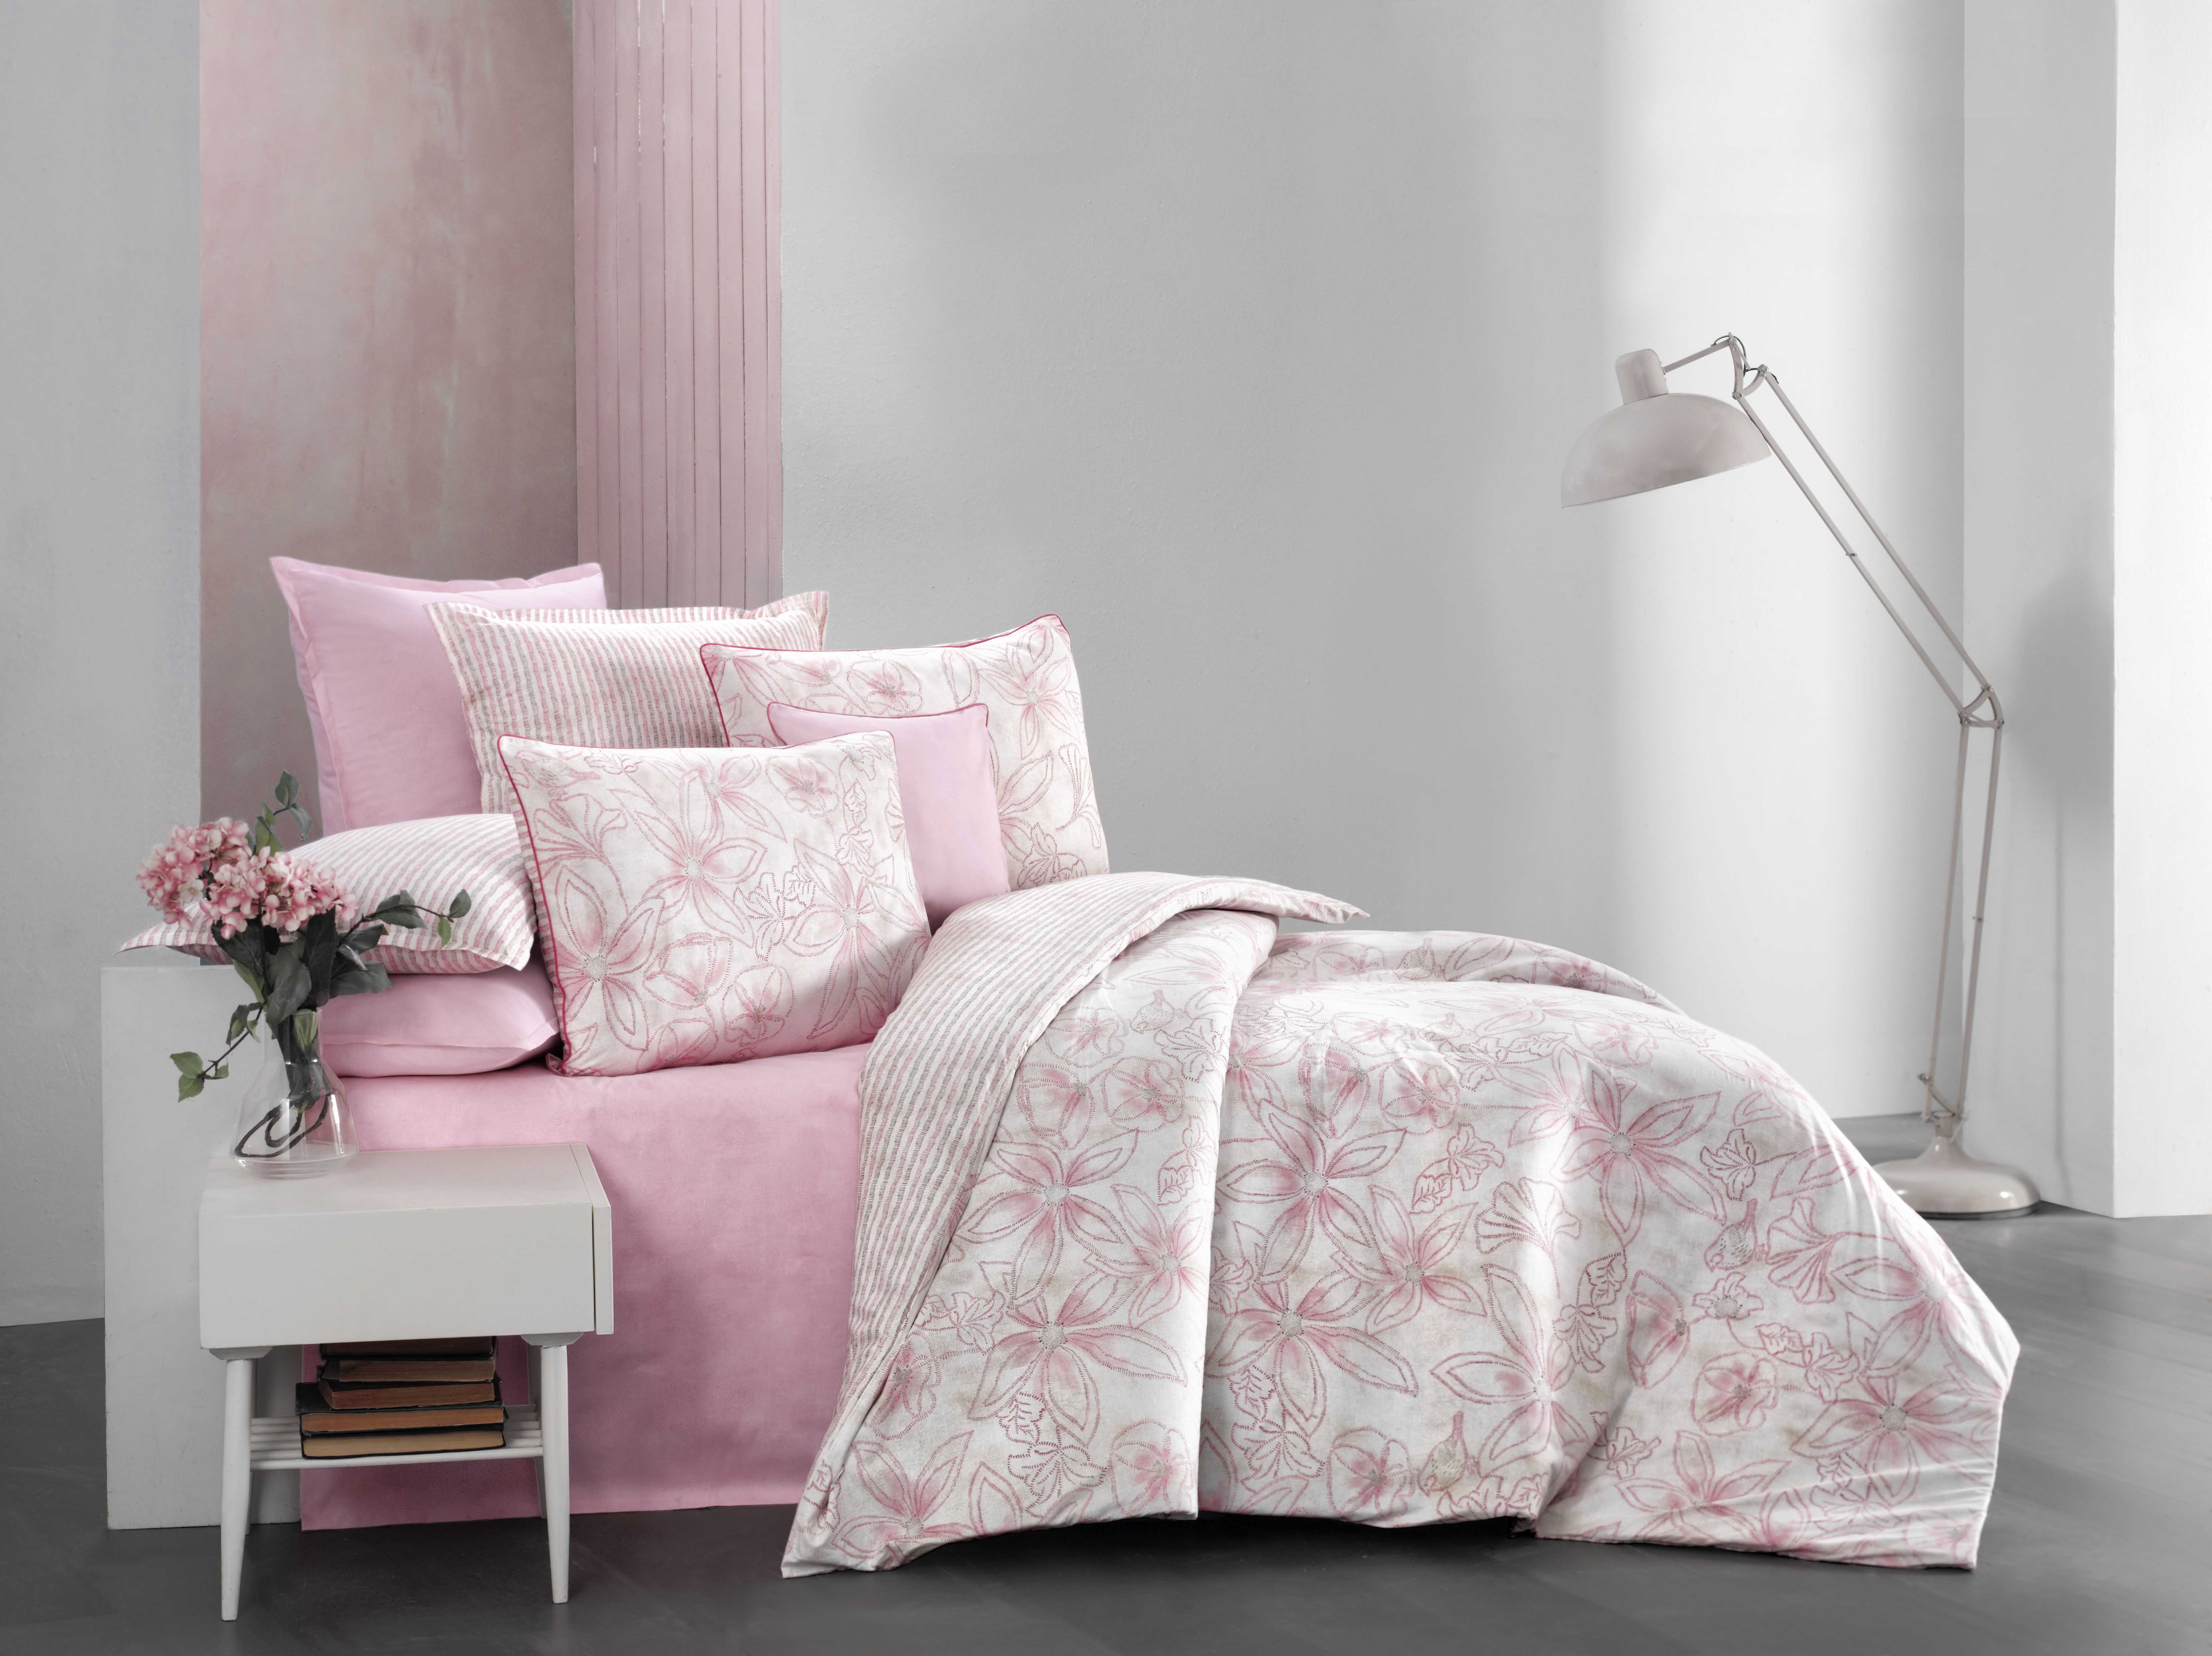 Maishaa Launches a New Collection of Bed Linen – Odilia